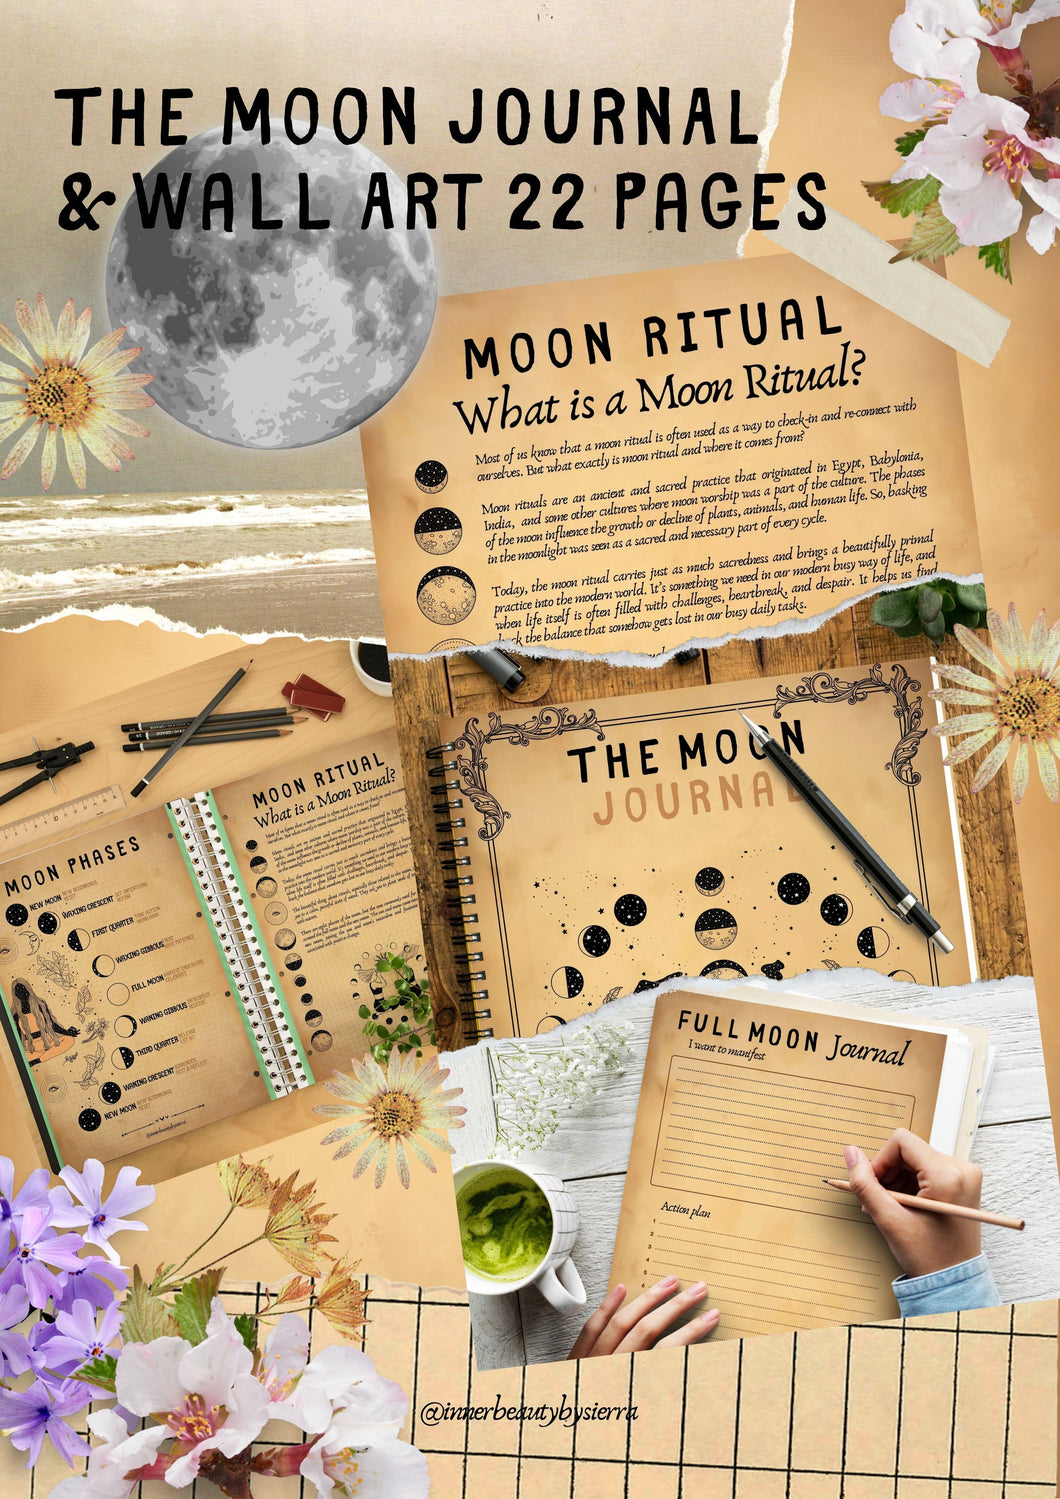 Moon Journal & Wall Arts 22 pages pdf vintage edition